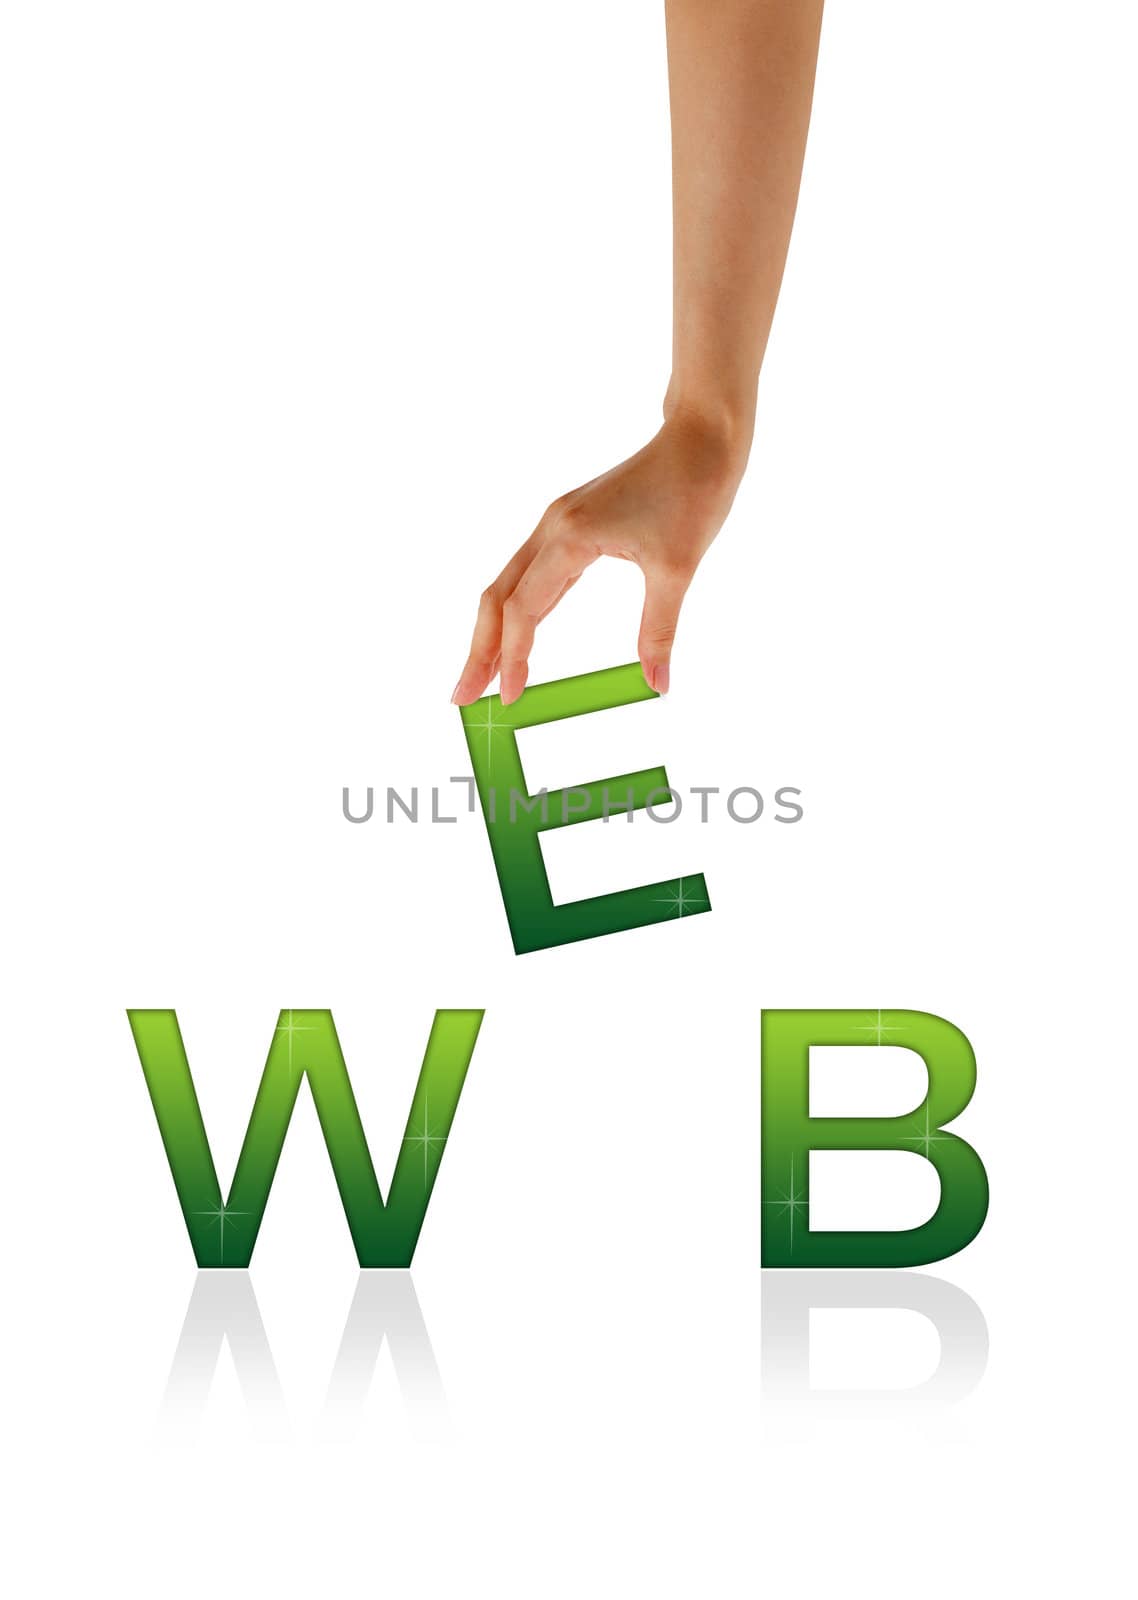 High resolution graphic of a hand holding the letter E from the word web.